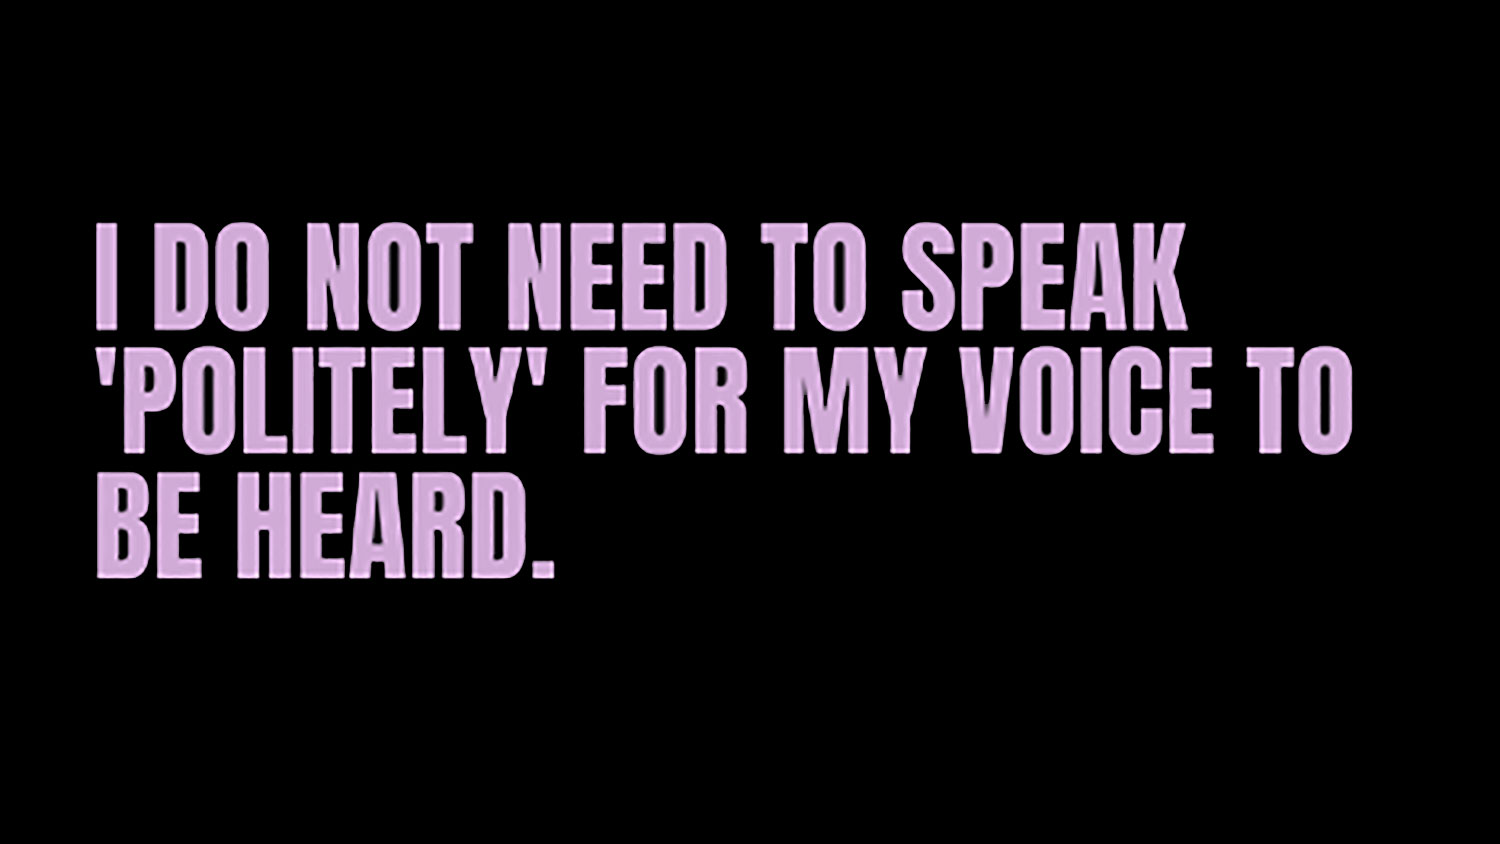 I do not need to speak 'politely' for my voice to be heard.